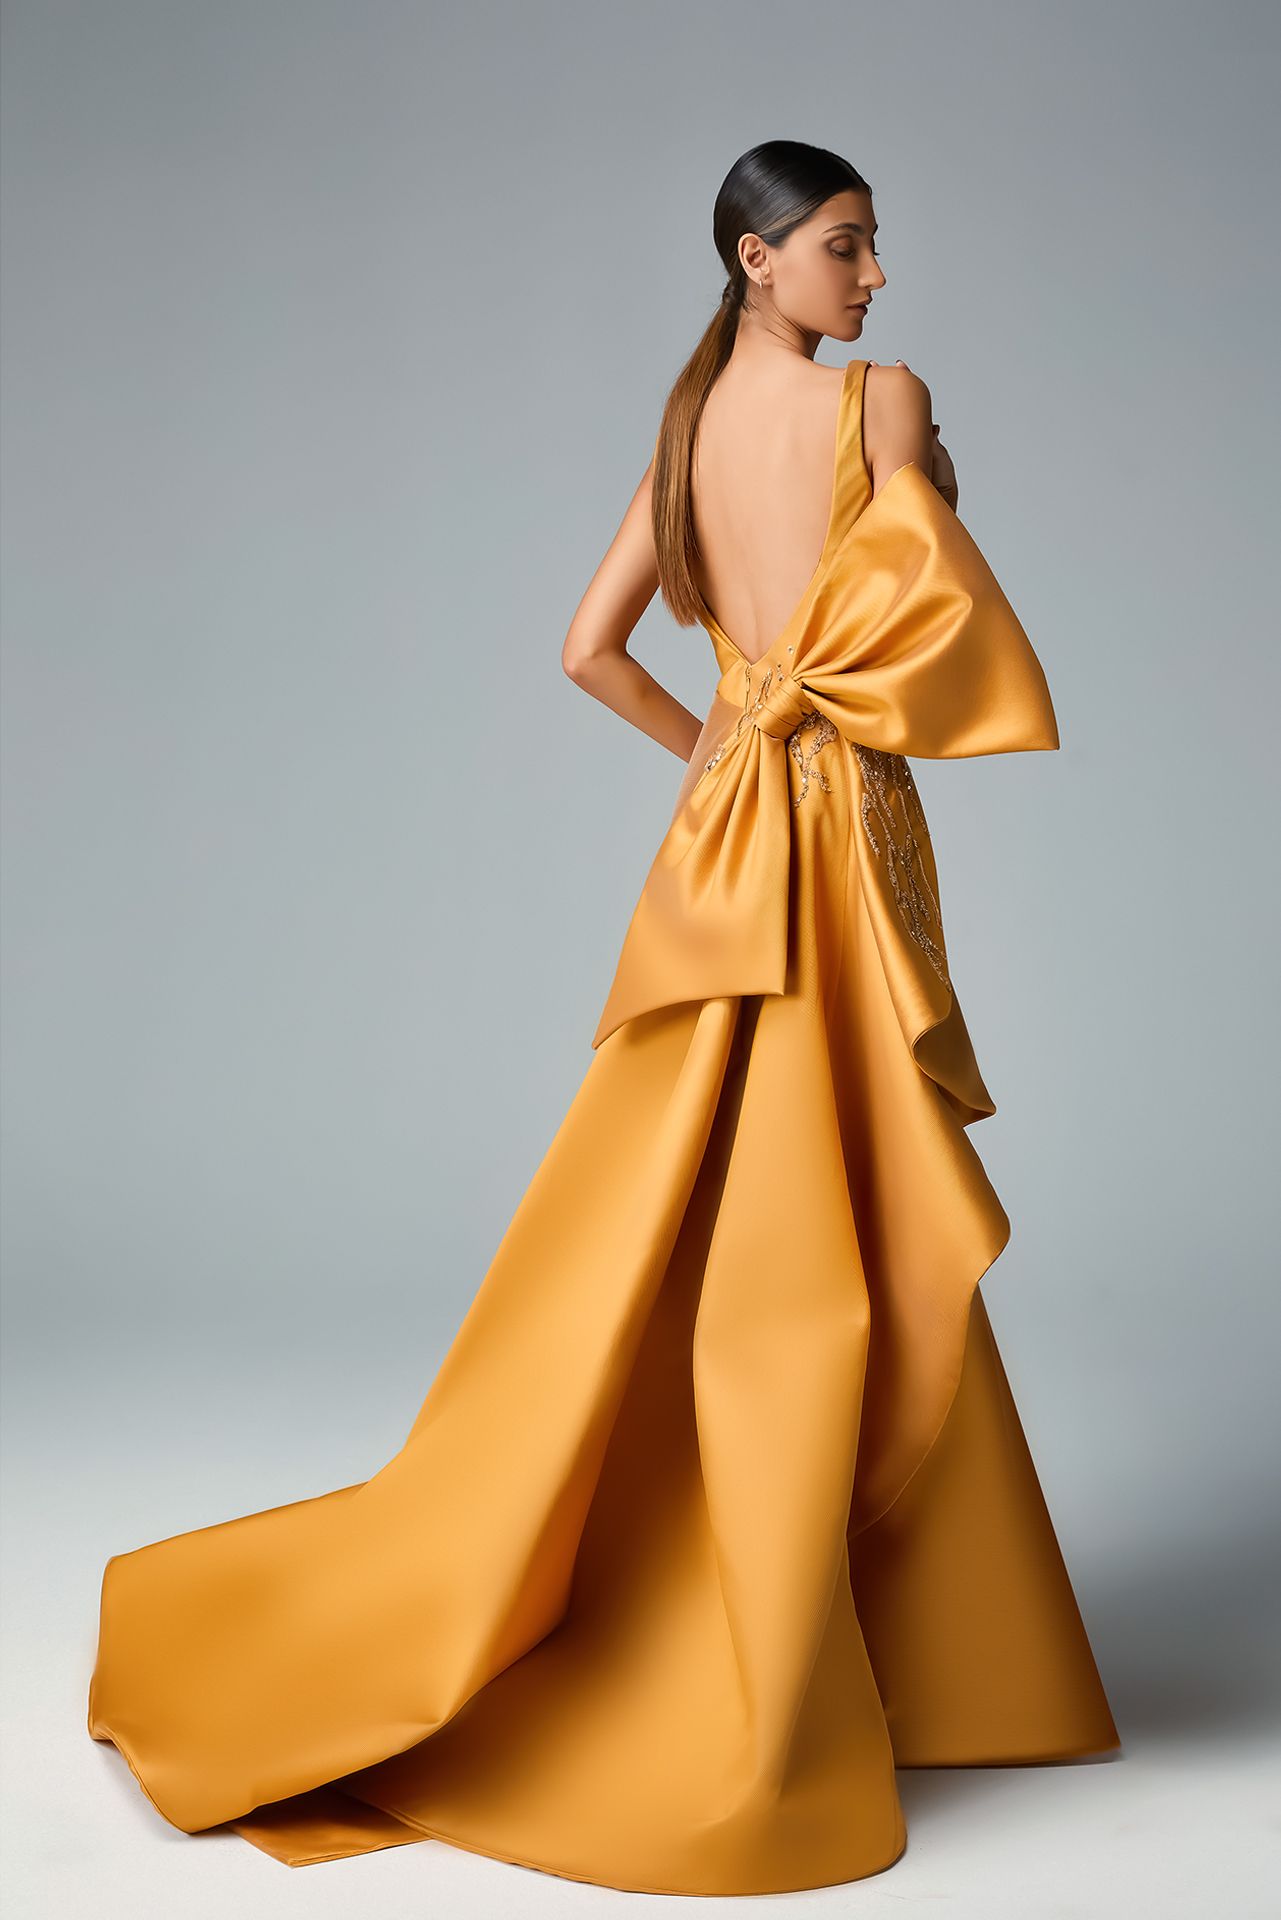 Gold Champagne Cady Evening Dress Draped Top Swarovski Crystal and Asymmetric Back Bow